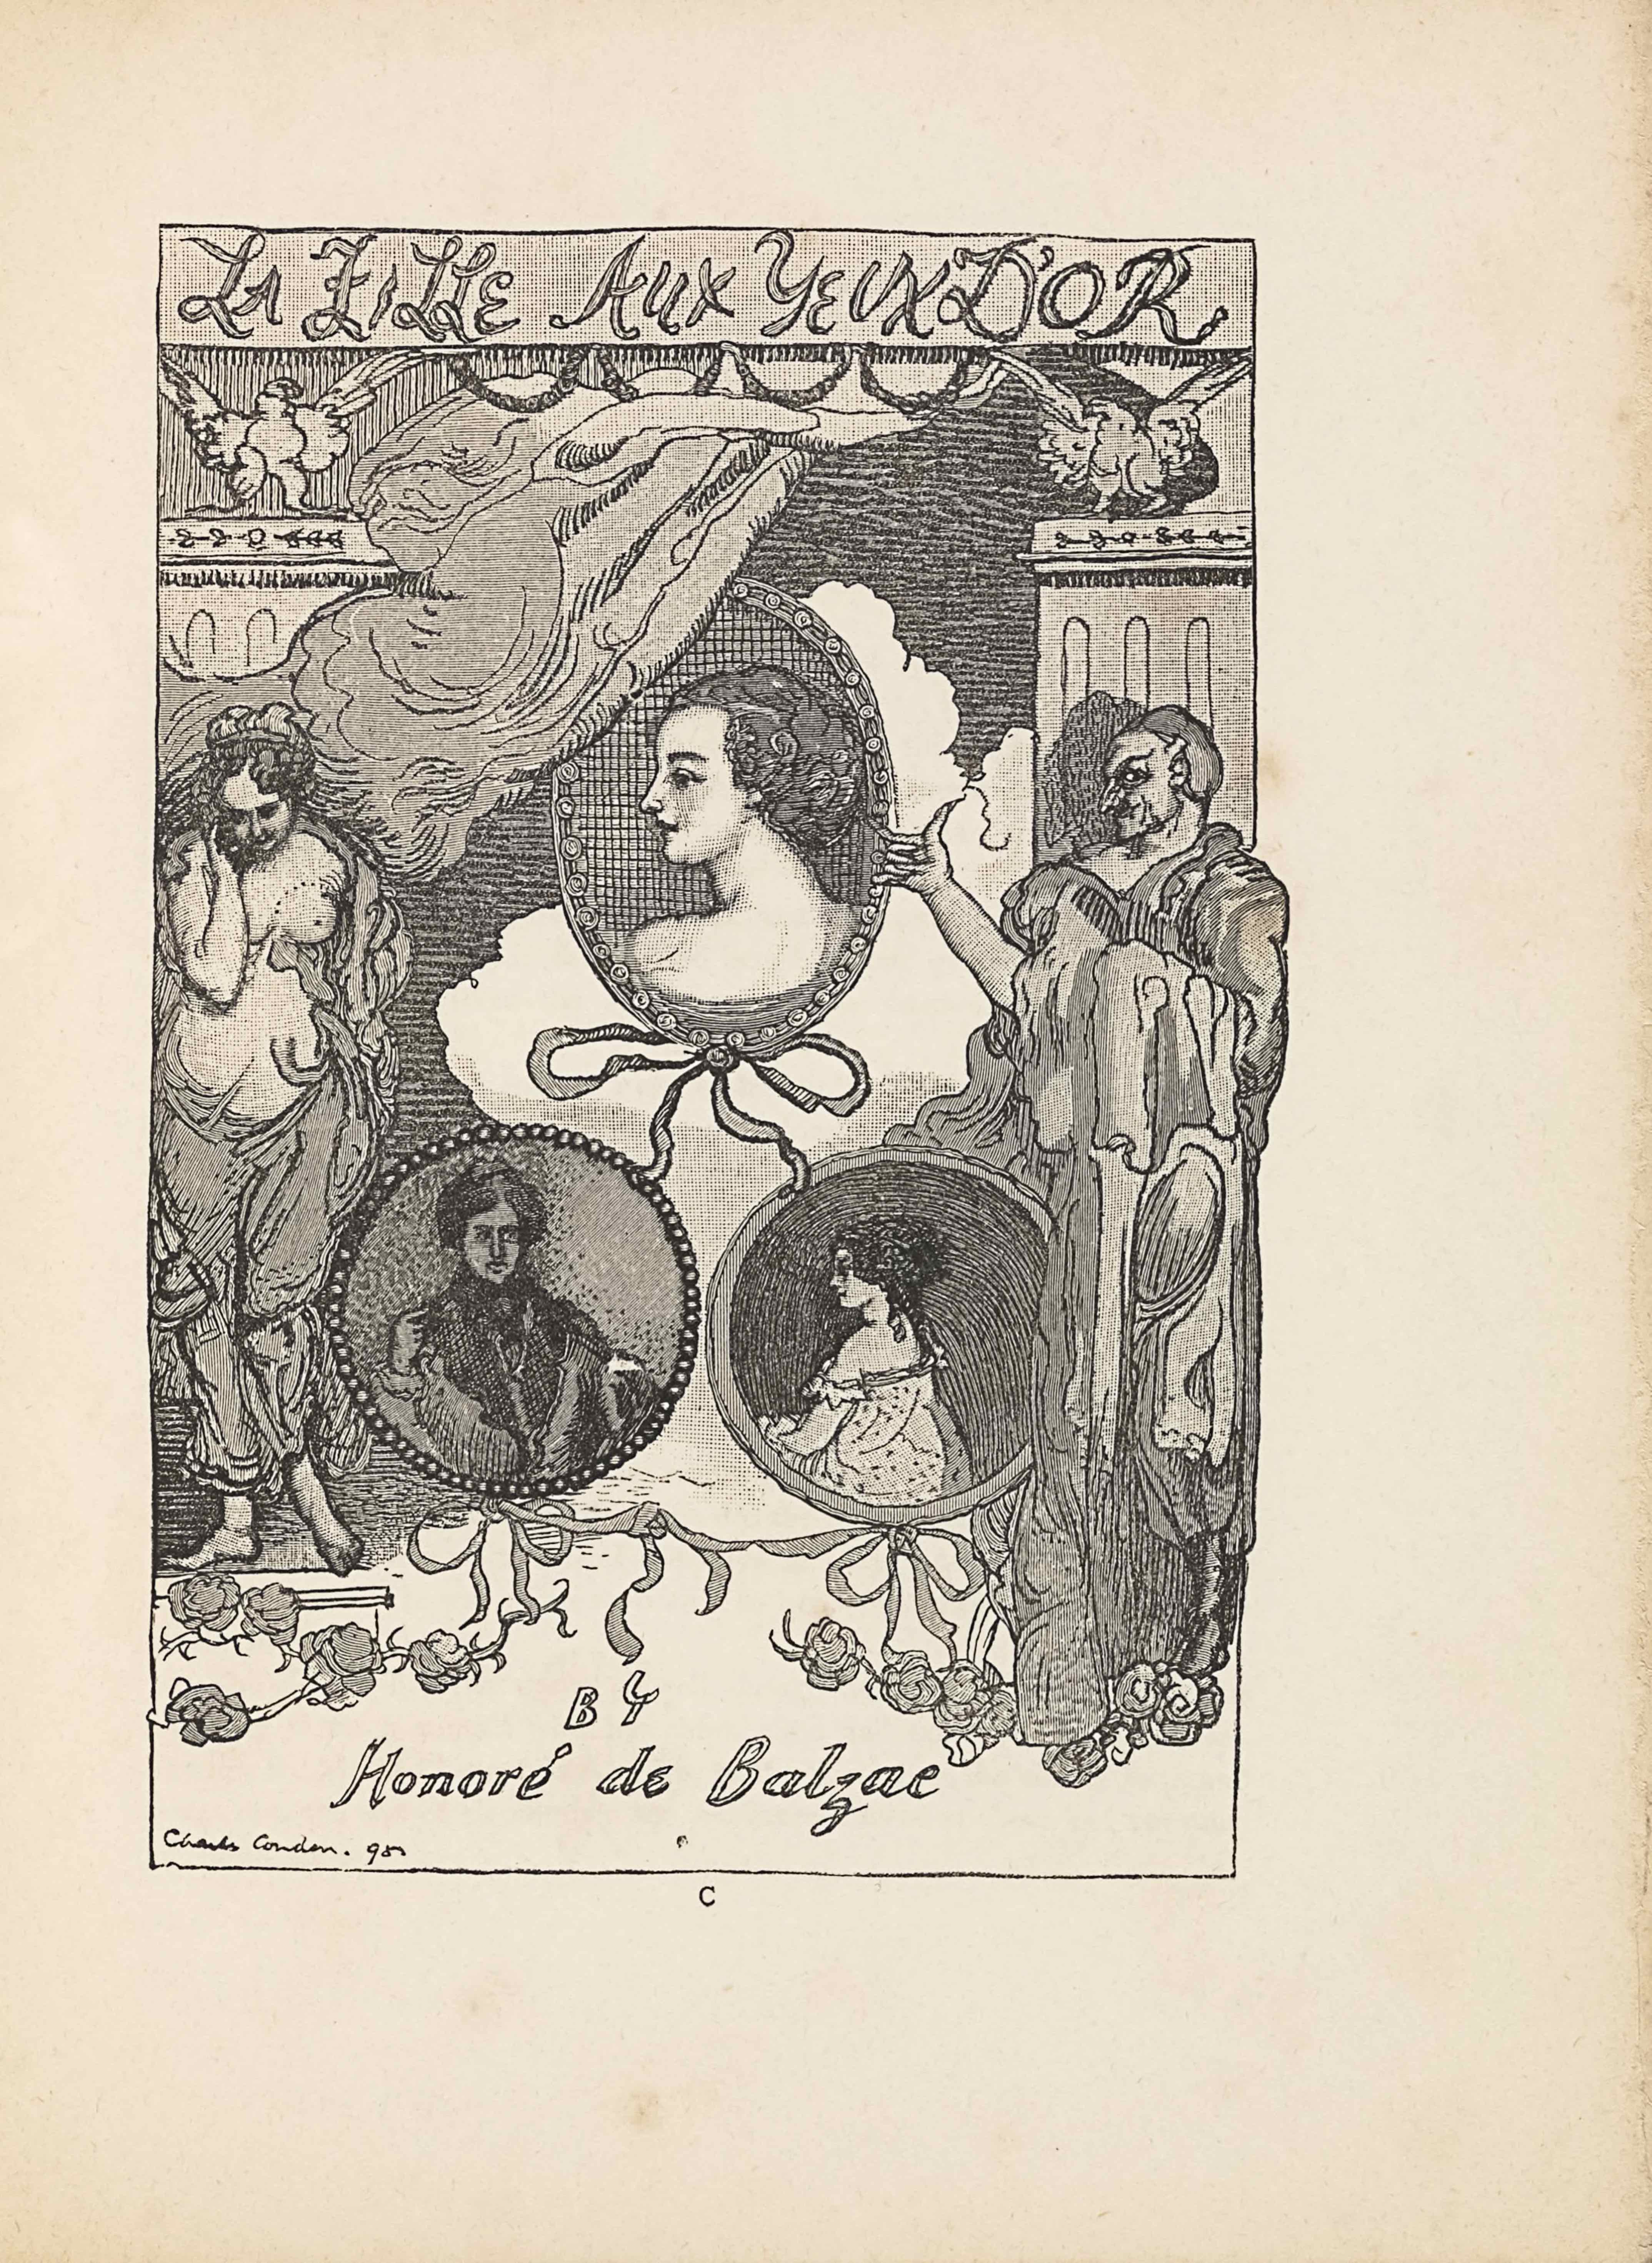 The image, a wood engraving of a crayon drawing by Charles Conder, is in portrait orientation. It is the frontispiece to Balzac’s La Fille Aux Yeux D’Or. This title, “LA FILLE AUX YEUX D’OR, appears in a banner with hand-lettered caps at the top edge. The text “BY [caps] // Honore de Balzac” is hand-lettered, centred, at the bottom. In the bottom left corner of the page is the artist’s signature and date: “Charles Conder. 98.”Between this publishing information are three cameo portraits suspended in cameos between two pillars fronted with allegorical figures. The two pillars rise to just below the line underscoring the title, leaving room for a falcon to sit atop each pillar. The falcons have their wings spread and their bodies facing the viewer, with their heads turned to face into the page towards each other. In the space on the upper page between the falcons and tops of the two pillars is a stream of cloudy smoke blowing from the centre of the separation line down and to the left, just in front of the left pillar. Behind the smoke is a black background made of close horizontal black lines. In the upper centre of the page is the top of the three medallion portraits. It is oval shaped and has an image of a woman in profile facing to the left. She is only visible from the shoulders and above, and has short curled hair pulled into an updo hairstyle. There is no clothing visible on her bare shoulders. The ornamental frame has a large bow hanging from the bottom edge. Behind the frame and down slightly on the page is another puff of smoke, but this one is much brighter and whiter than the one above. On the left edge of the page, standing in front of a pillar, is a half-clothed female figure. The woman is standing and facing the viewer, but her face is turned down to look at the ground. She has a nude upper body with material wrapped around her legs and behind her back. She has her right hand lifted up to cup the right side of her face. Her hair is curly and short. Her left foot is lifted slightly up from the ground on which she stands. To the right of the oval frame is a male figure standing in front of the pillar on the right. The man is wearing a robe made of many layers of draped material wrapped around him. He is standing to face the viewer, but his head is turned to face in towards the centre of the page. His face is visible in profile. He has his right arm lifted up and his long-nailed thumb is extended out to touch the edge of the oval frame. He has a hooked nose and a horn on his head, a seeming representation of the devil. His hair is short and dark. His shadow falls behind him and to the left, visible on the front of the pillar behind him. Between these standing figures are two more portrait frames, each perfectly circular. The medallion on the left shows a man facing the viewer. He has her dark hair and is wearing a dark jacket, shirt, and tie; his right hand is lifted up to his right shoulder. He is staring straight ahead. The medallion portrait beside this one is of a seated woman turned in profile to the left. The woman is visible from the waist up. She is wearing an off-the-shoulder top that is lightly shaded with polka-dots. She has curled hair that is pulled up on top her head. The two circular portraits are connected by ribbons and bows that hang down from the bottom of each of them and tied together in the middle space below. The remainder of the page is the light-coloured and festooned with roses.